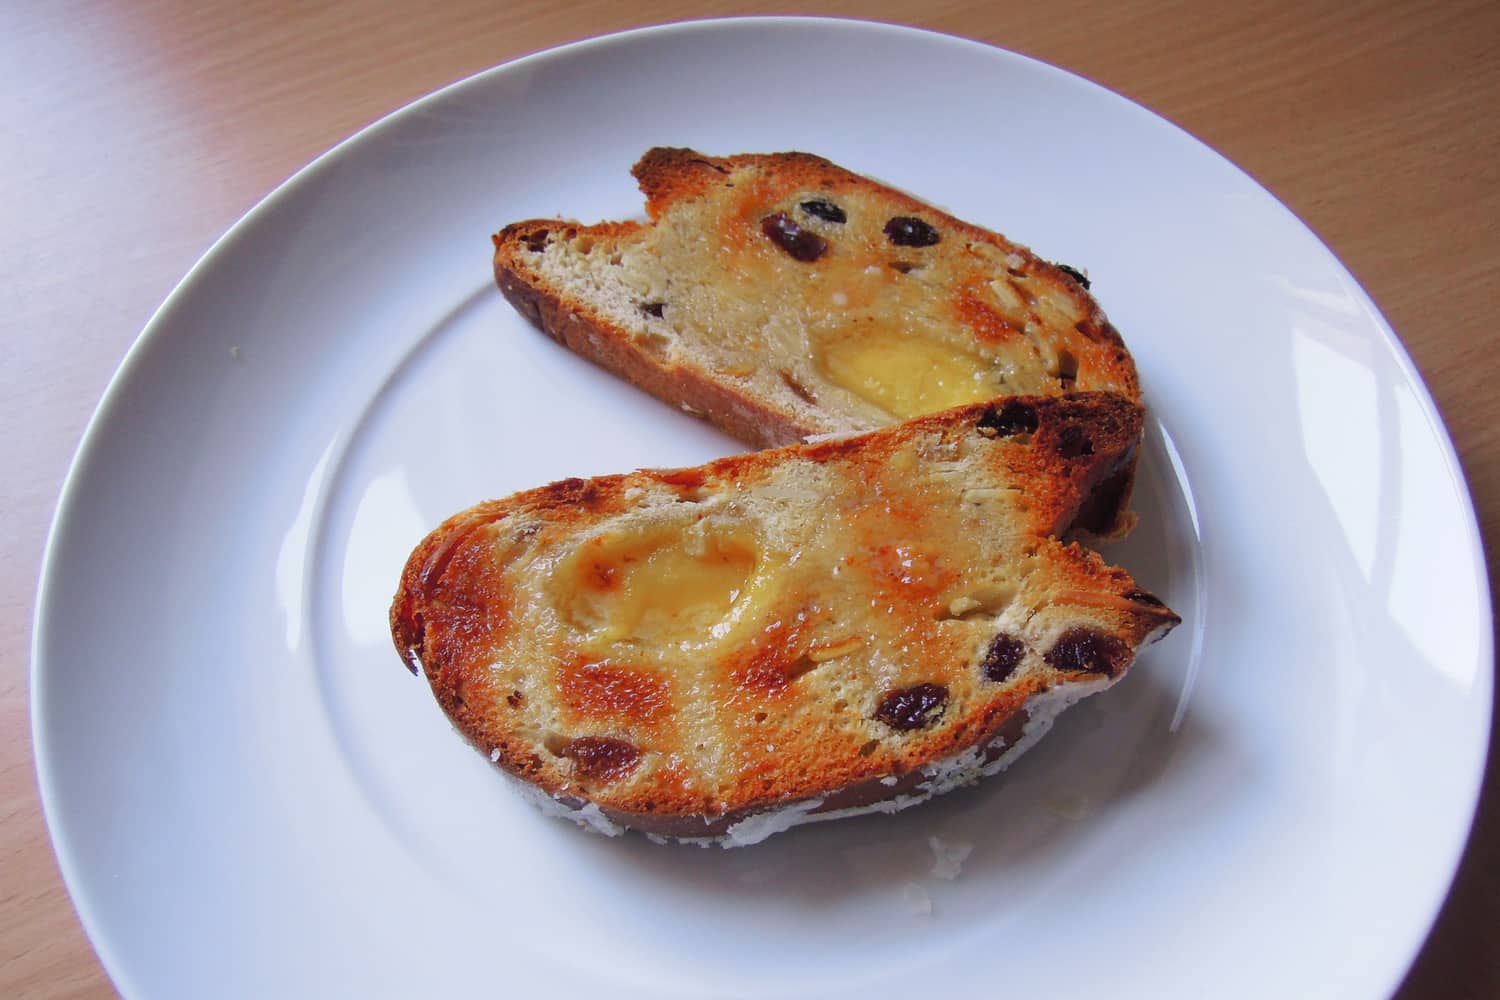 Toasted Stollen ready to eat